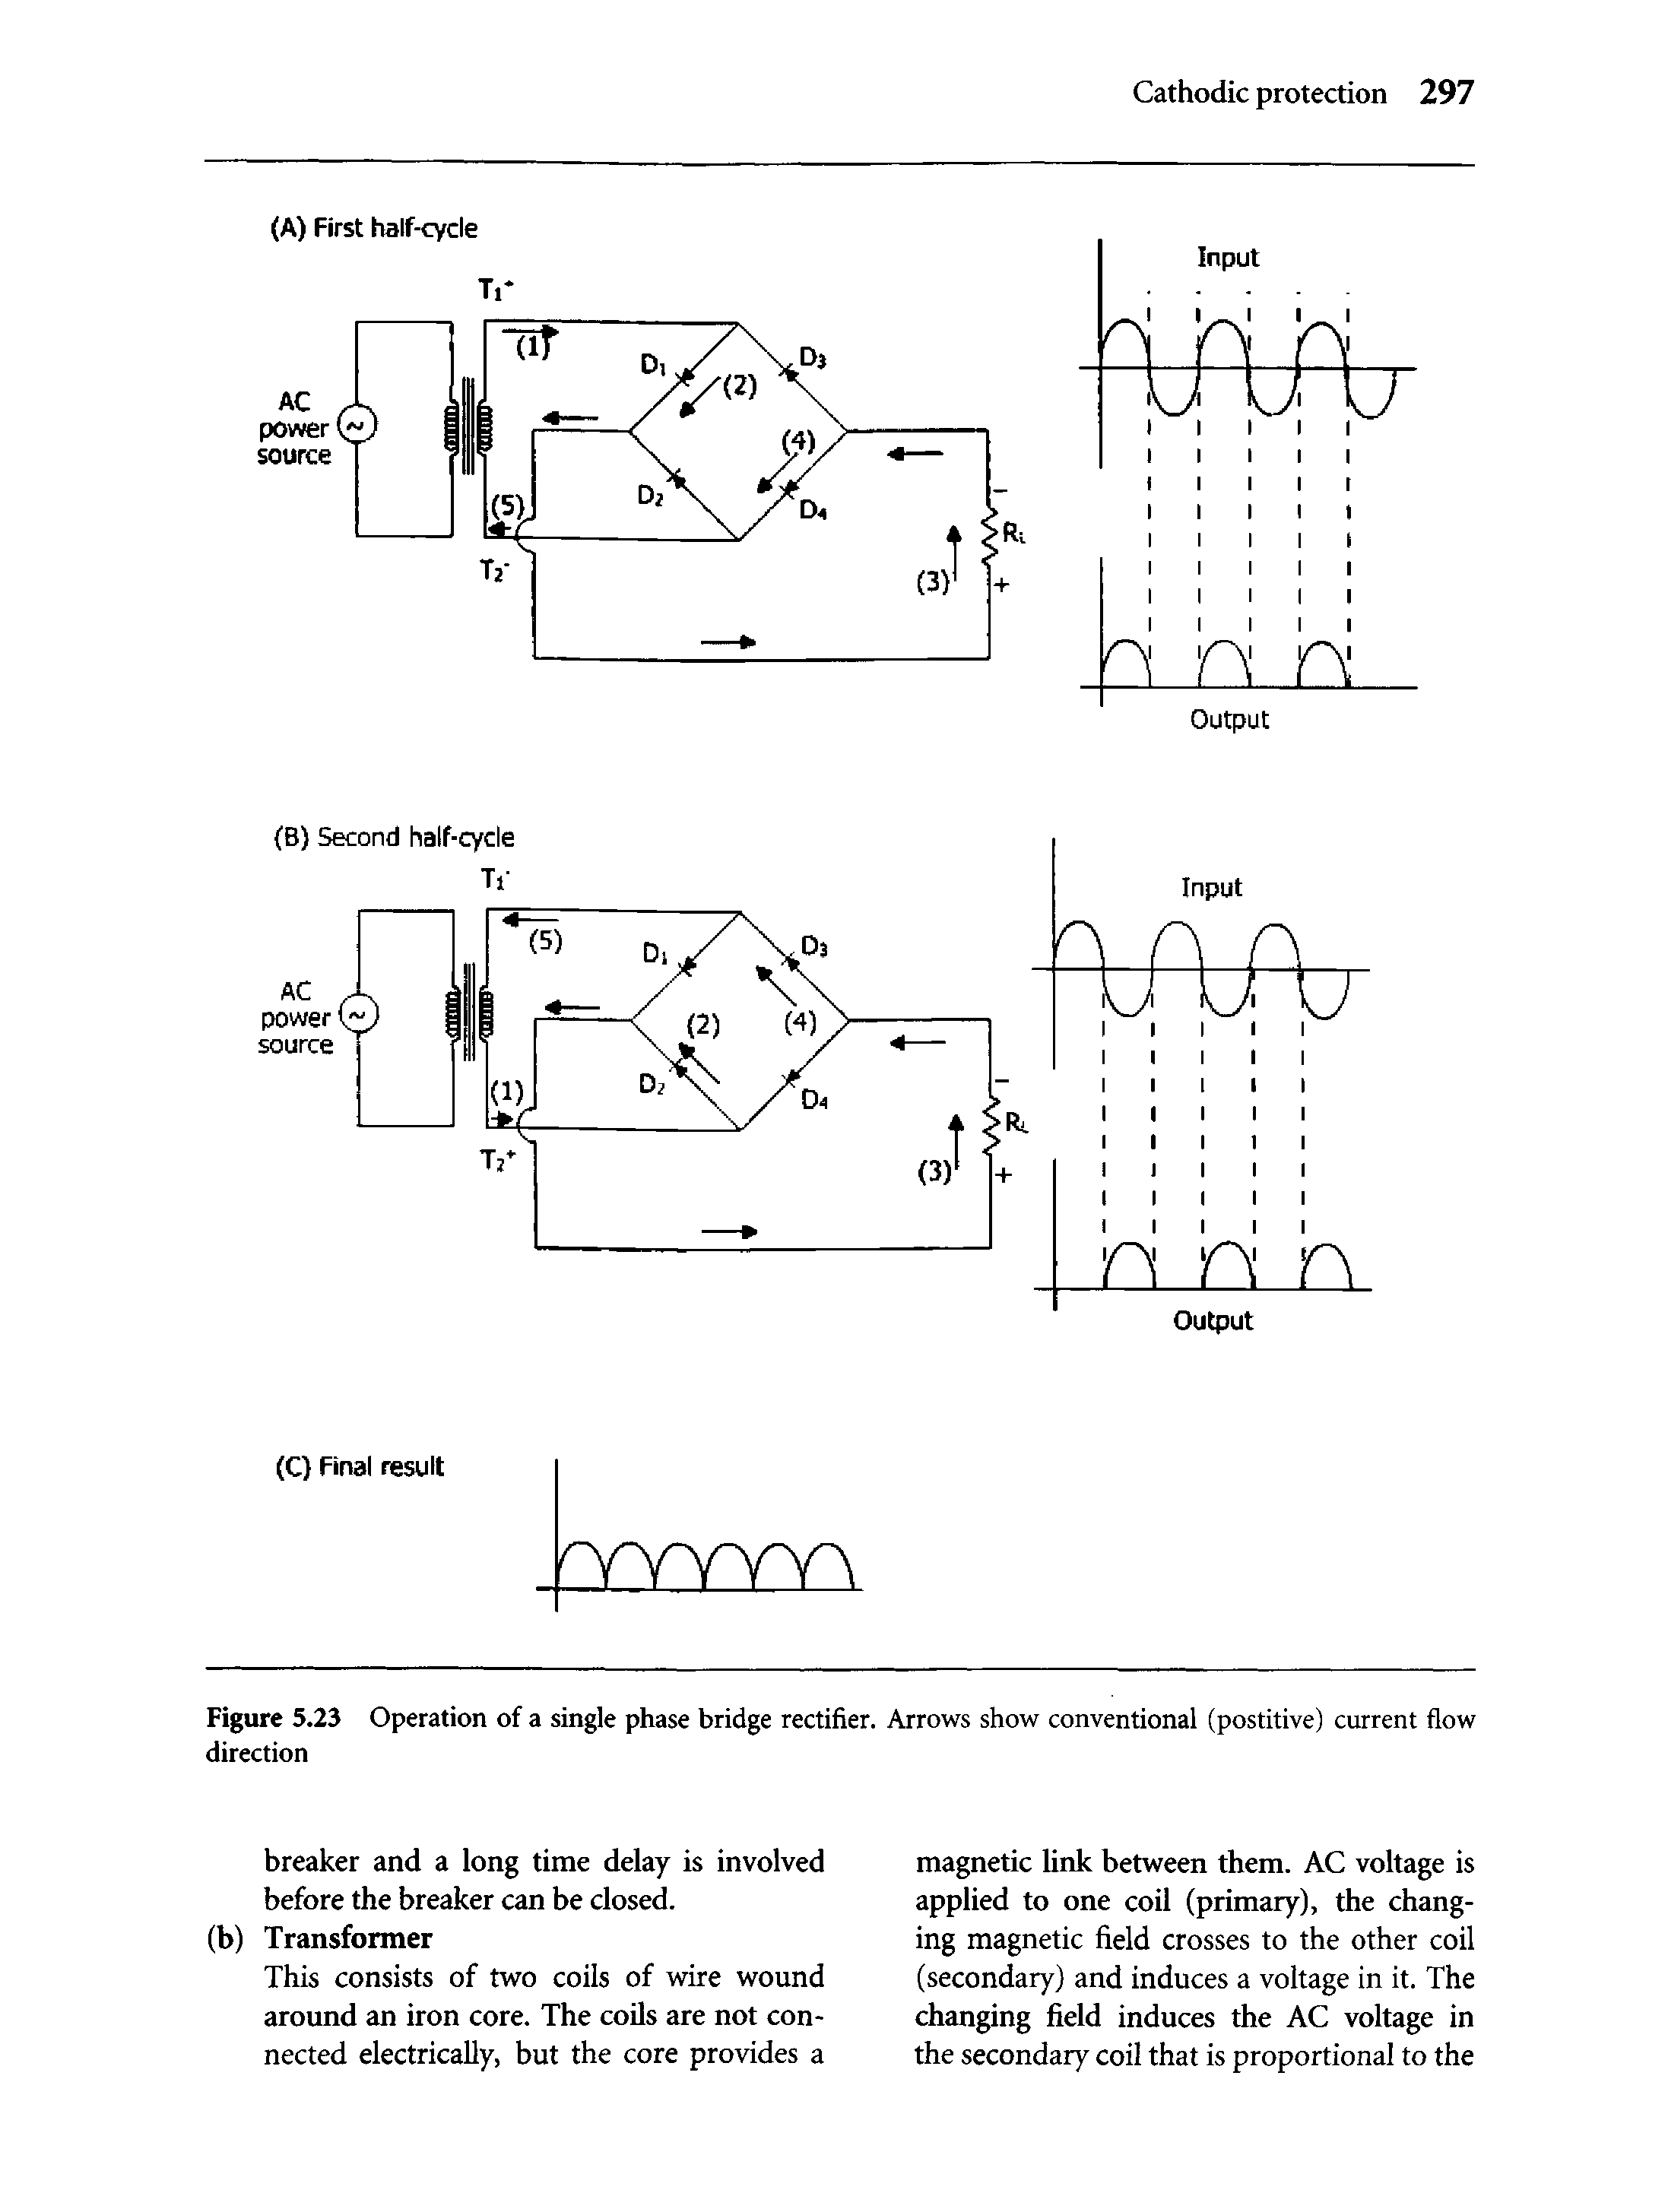 Figure 5.23 Operation of a single phase bridge rectifier. Arrows show conventional (postitive) current flow direction...